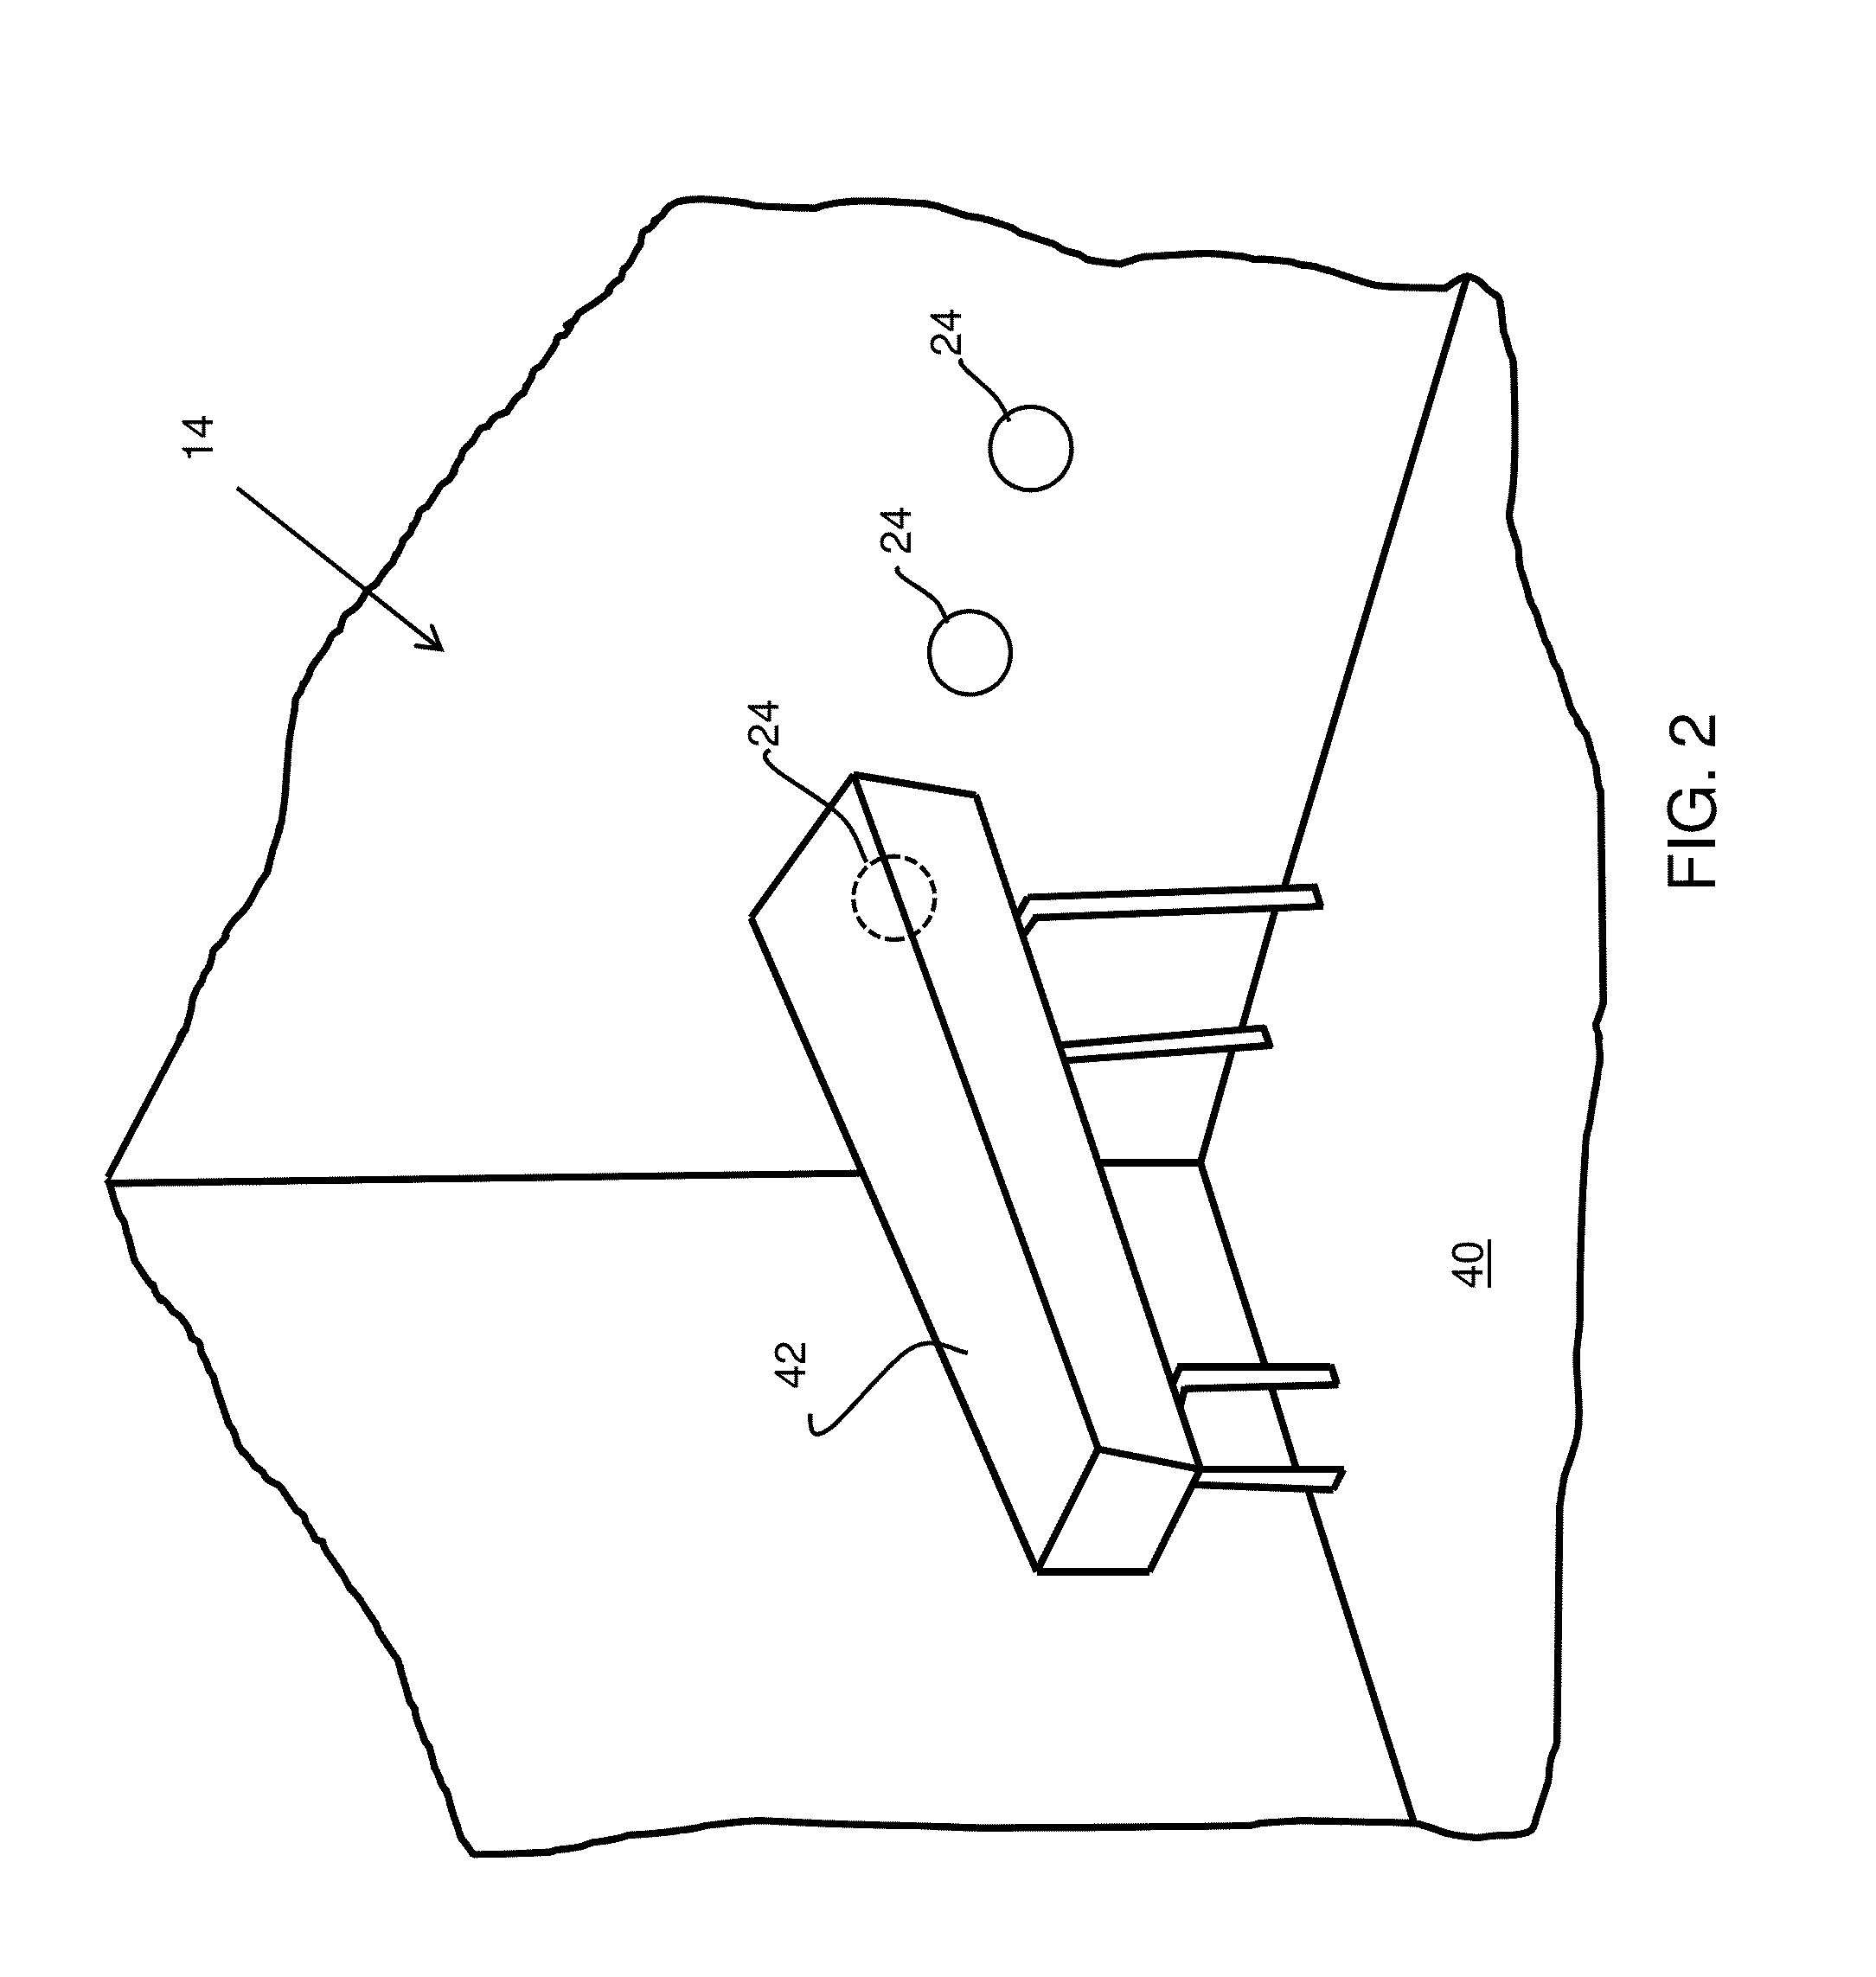 In situ gravity drainage system and method for extracting bitumen from alternative pay regions